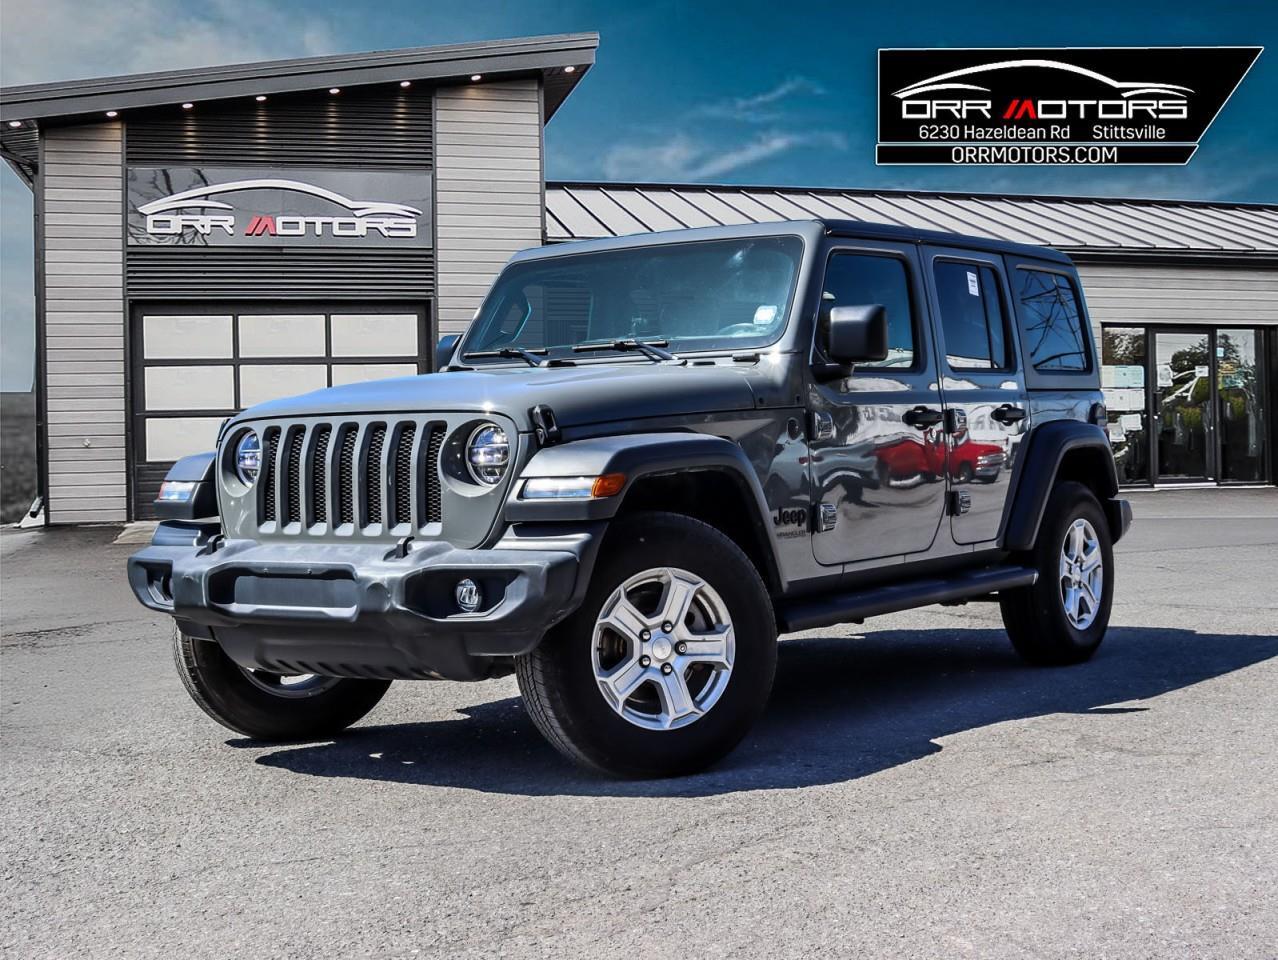 2022 Jeep WRANGLER UNLIMITED Sport SOLD CERTIFIED AND IN EXCELLENT CONDITION!